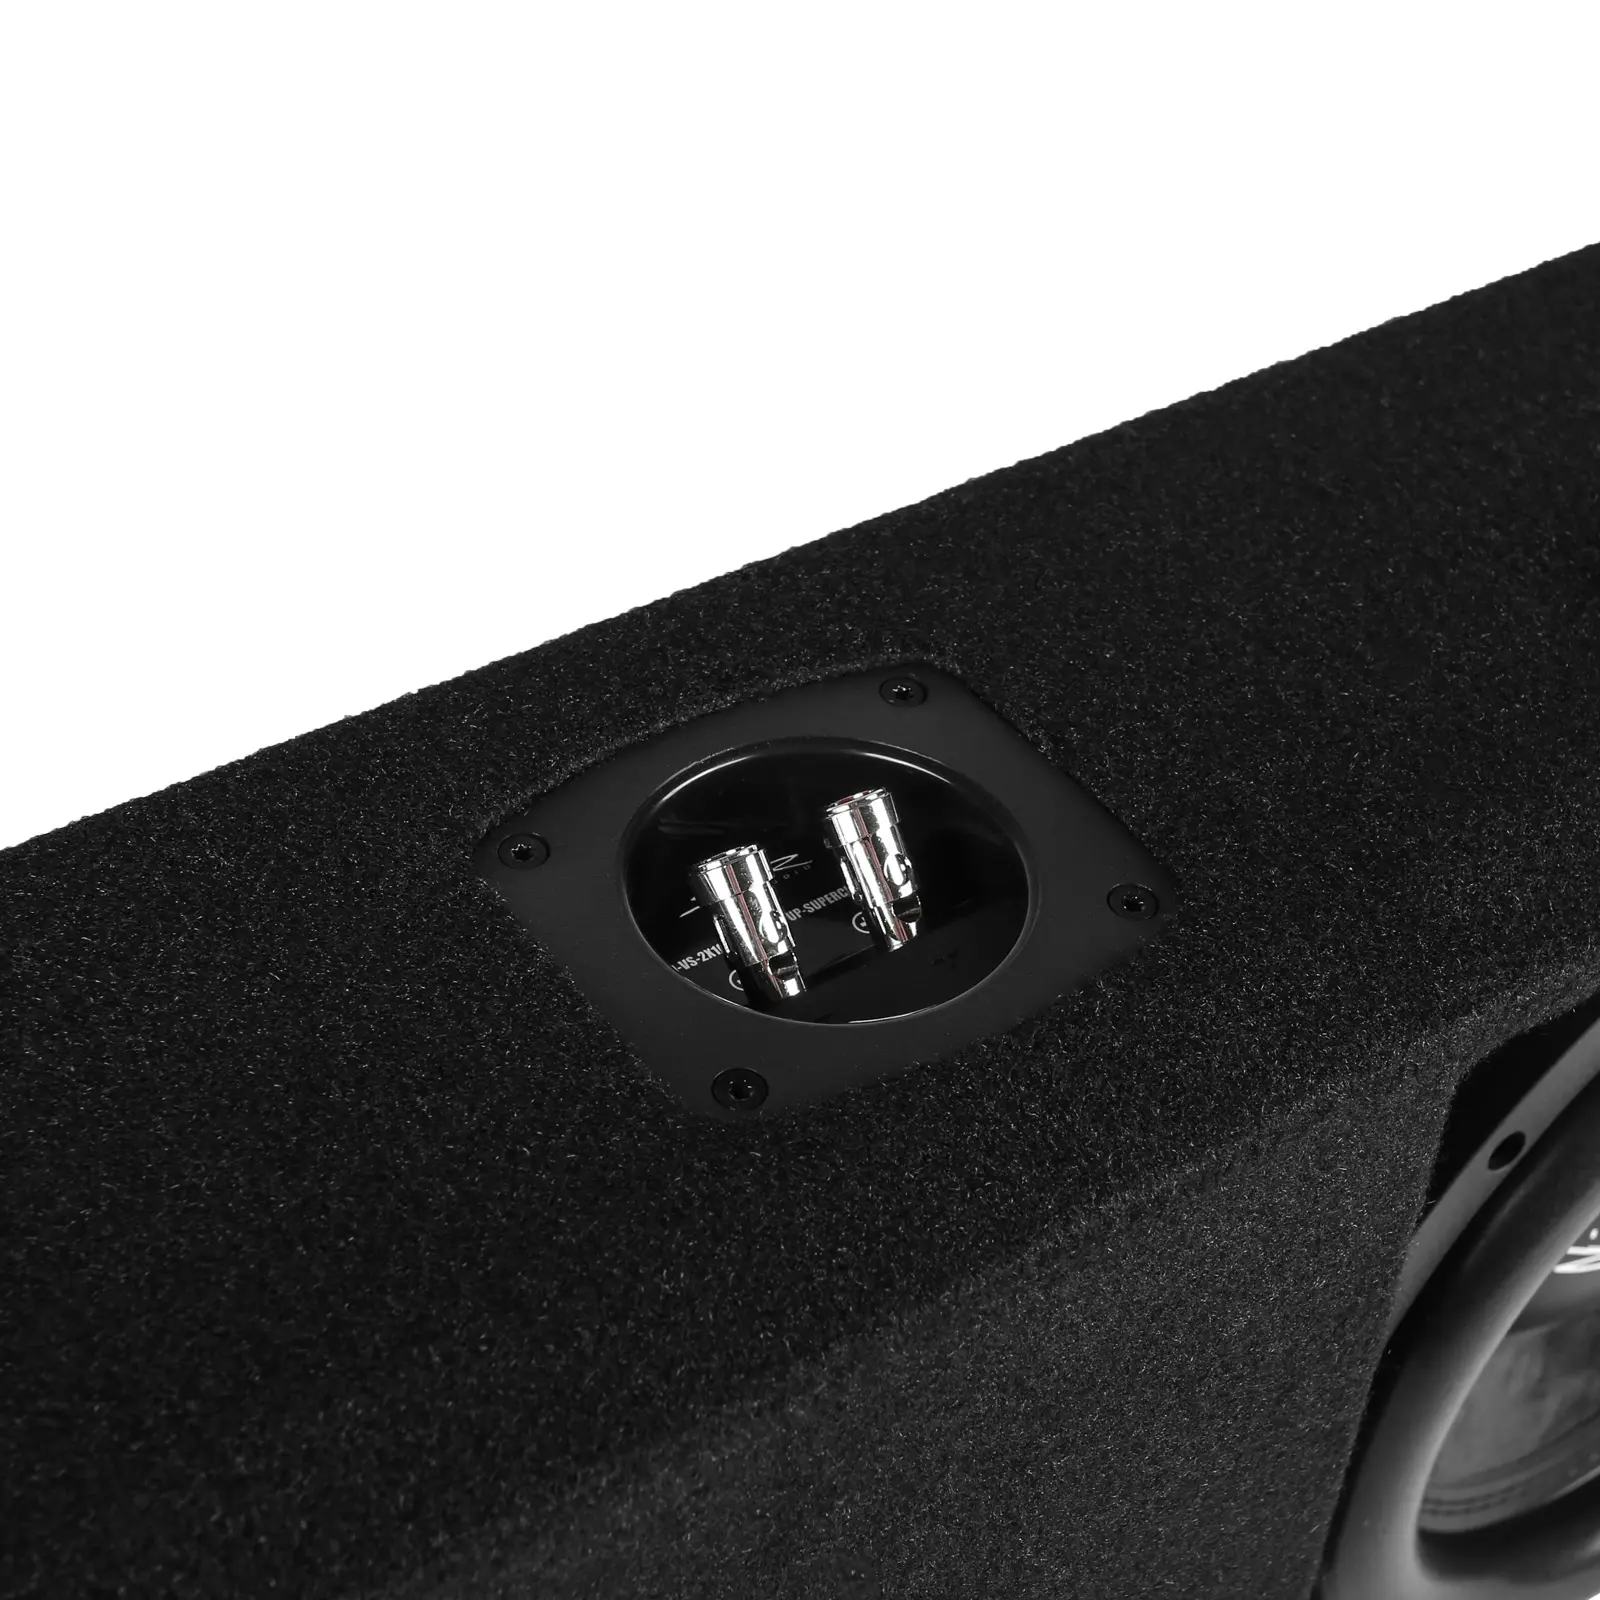 Dual 10" 1,600W Max Power Loaded Ported Subwoofer Enclosure Compatible with 2015-2024 Ford F-150 Super Crew Cab Trucks #6